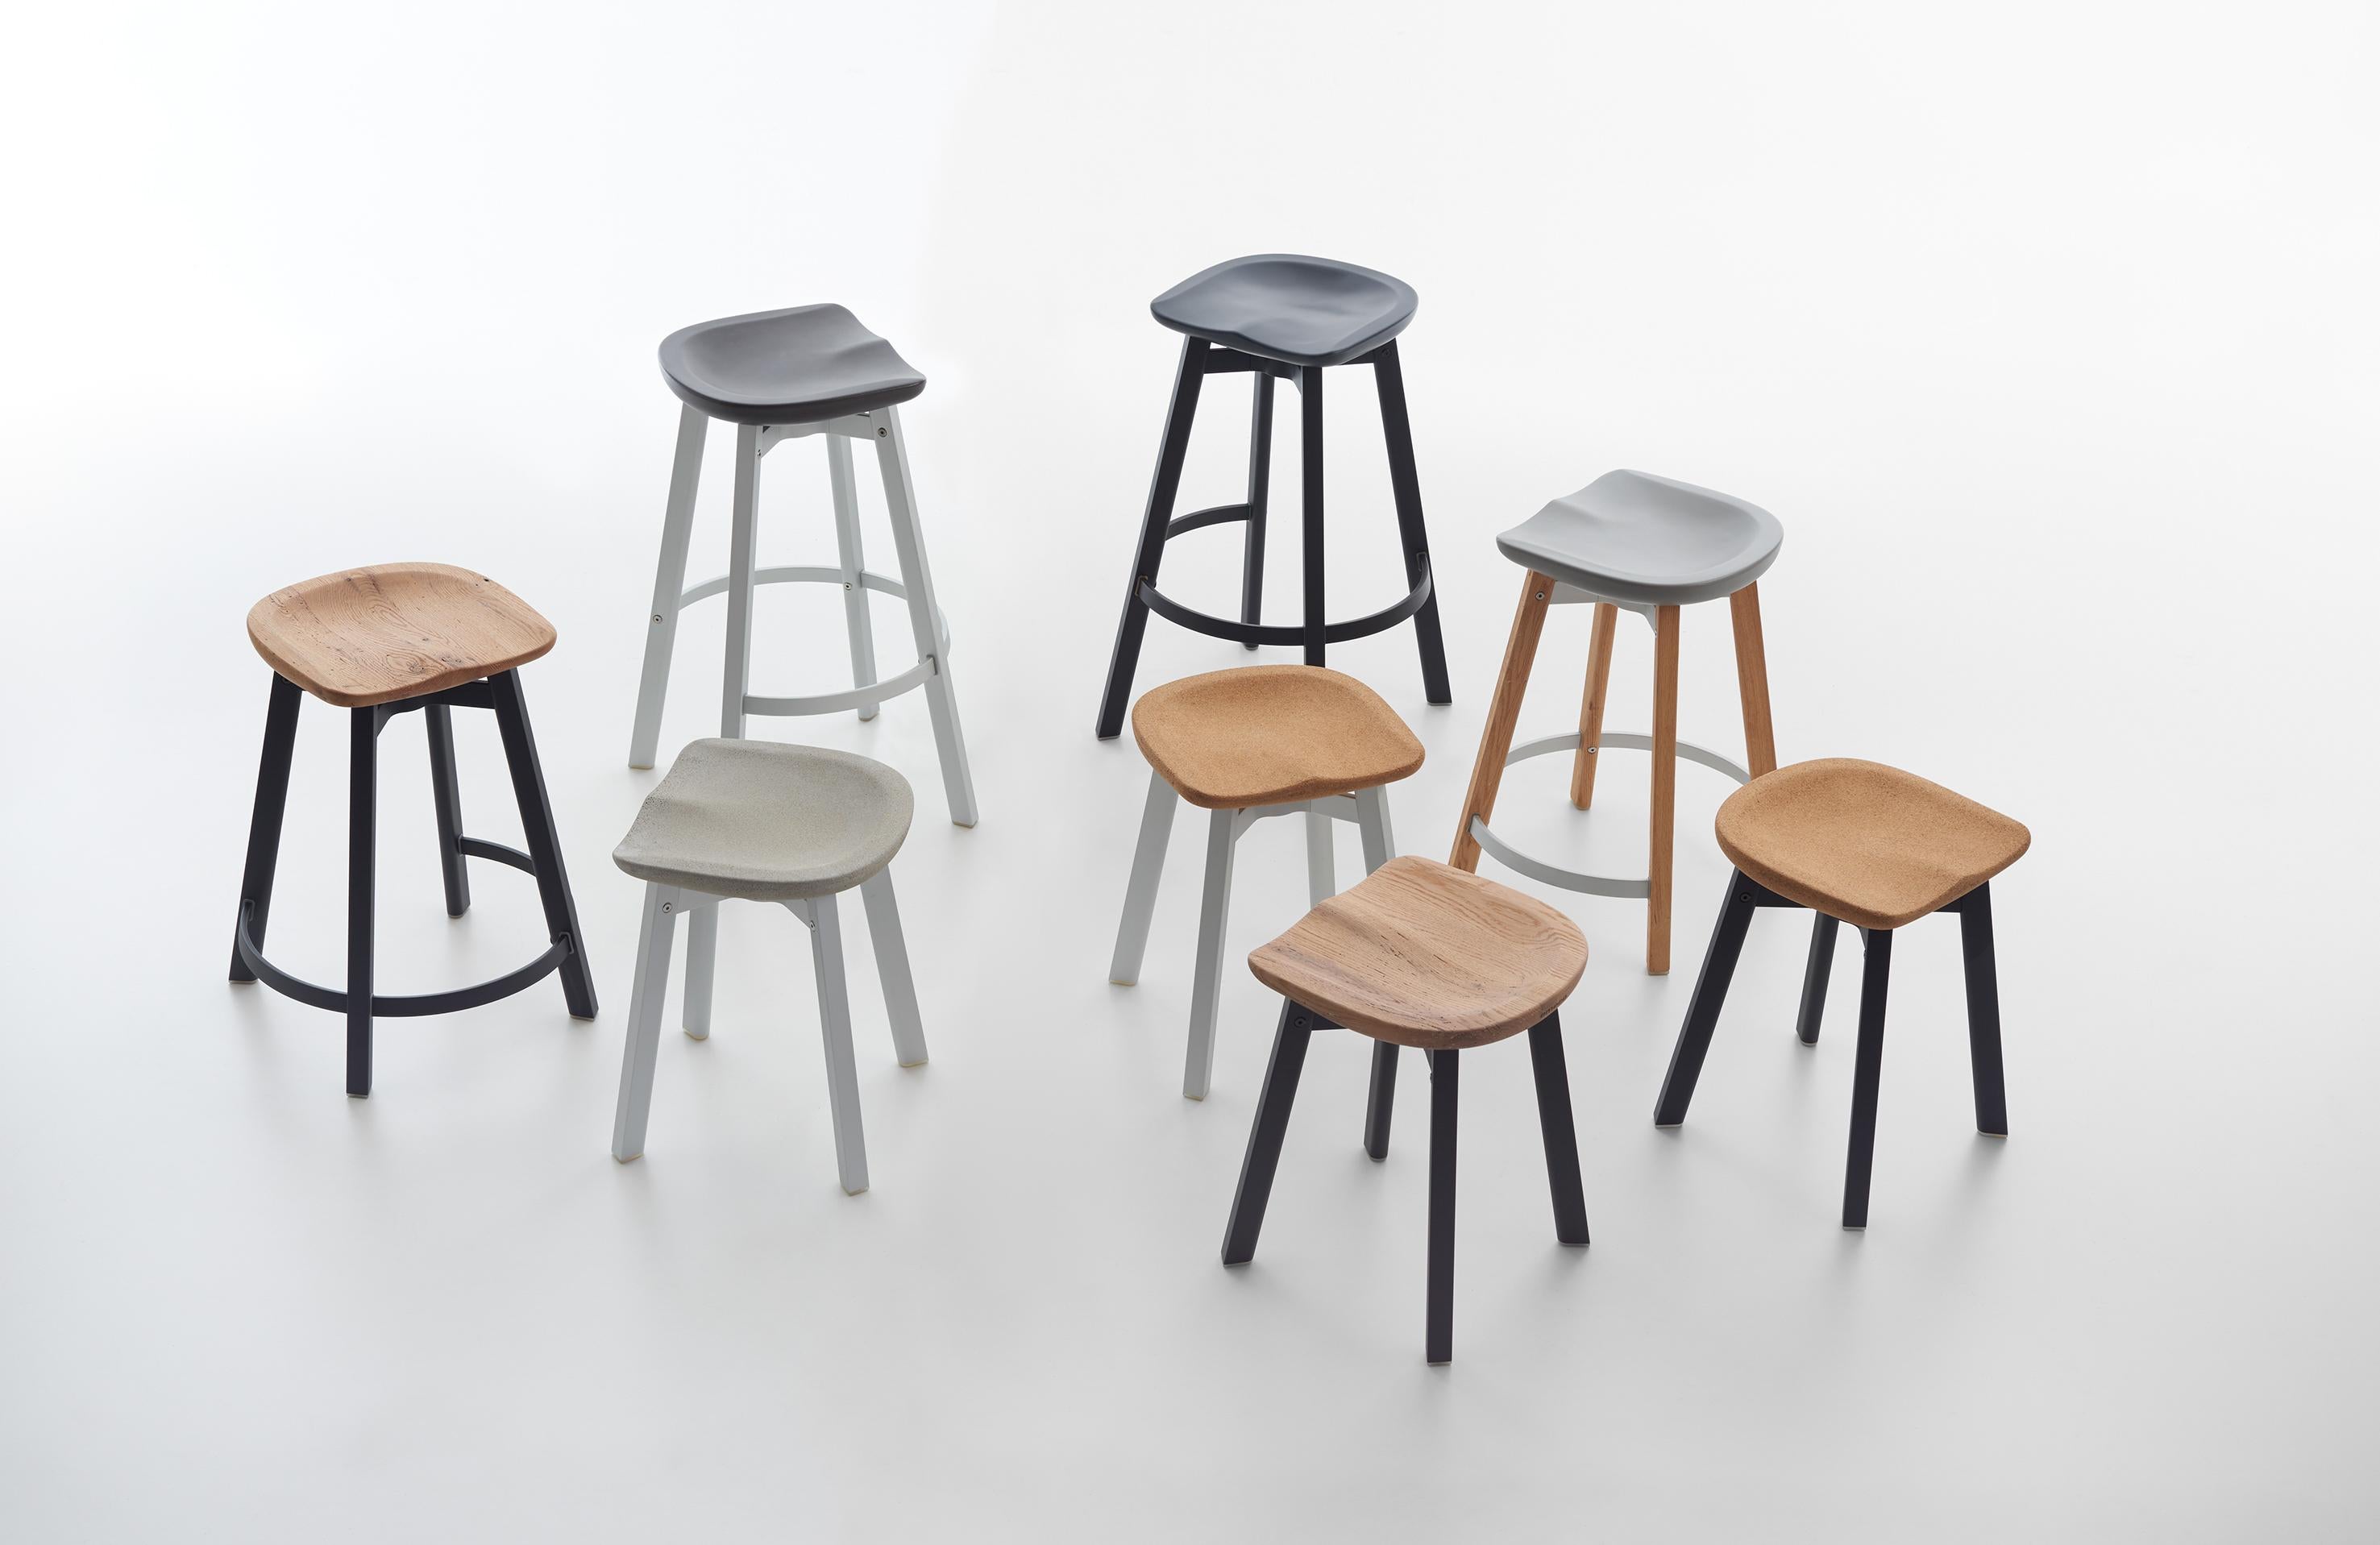 American Emeco Su Counter Stool in Natural Aluminum w/ Flint Seat by Nendo